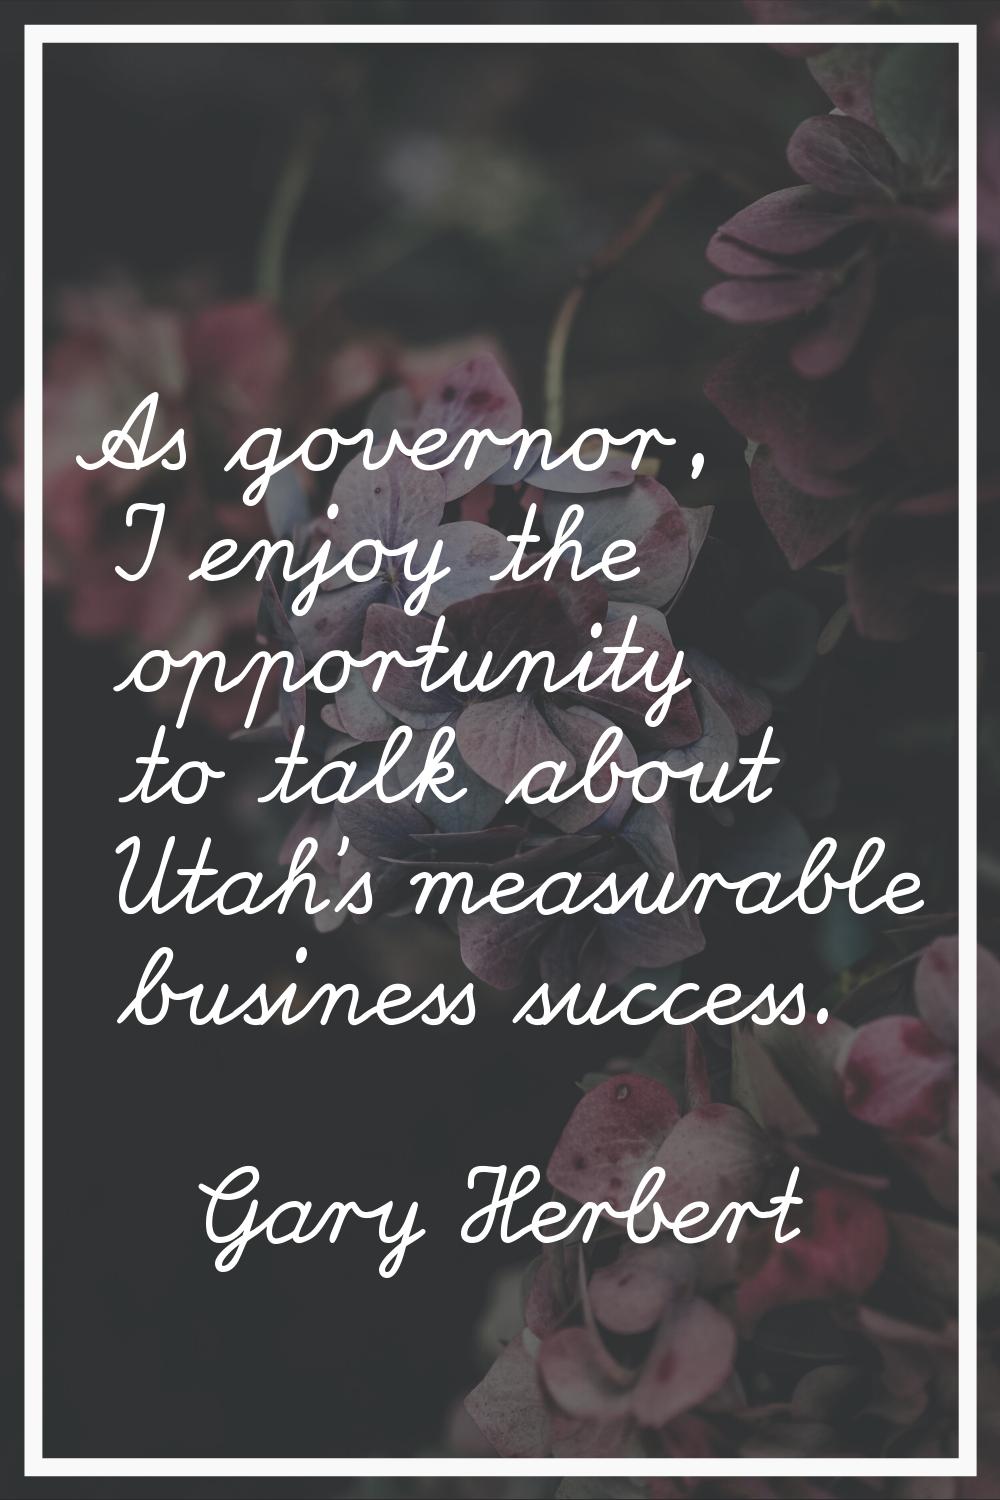 As governor, I enjoy the opportunity to talk about Utah's measurable business success.